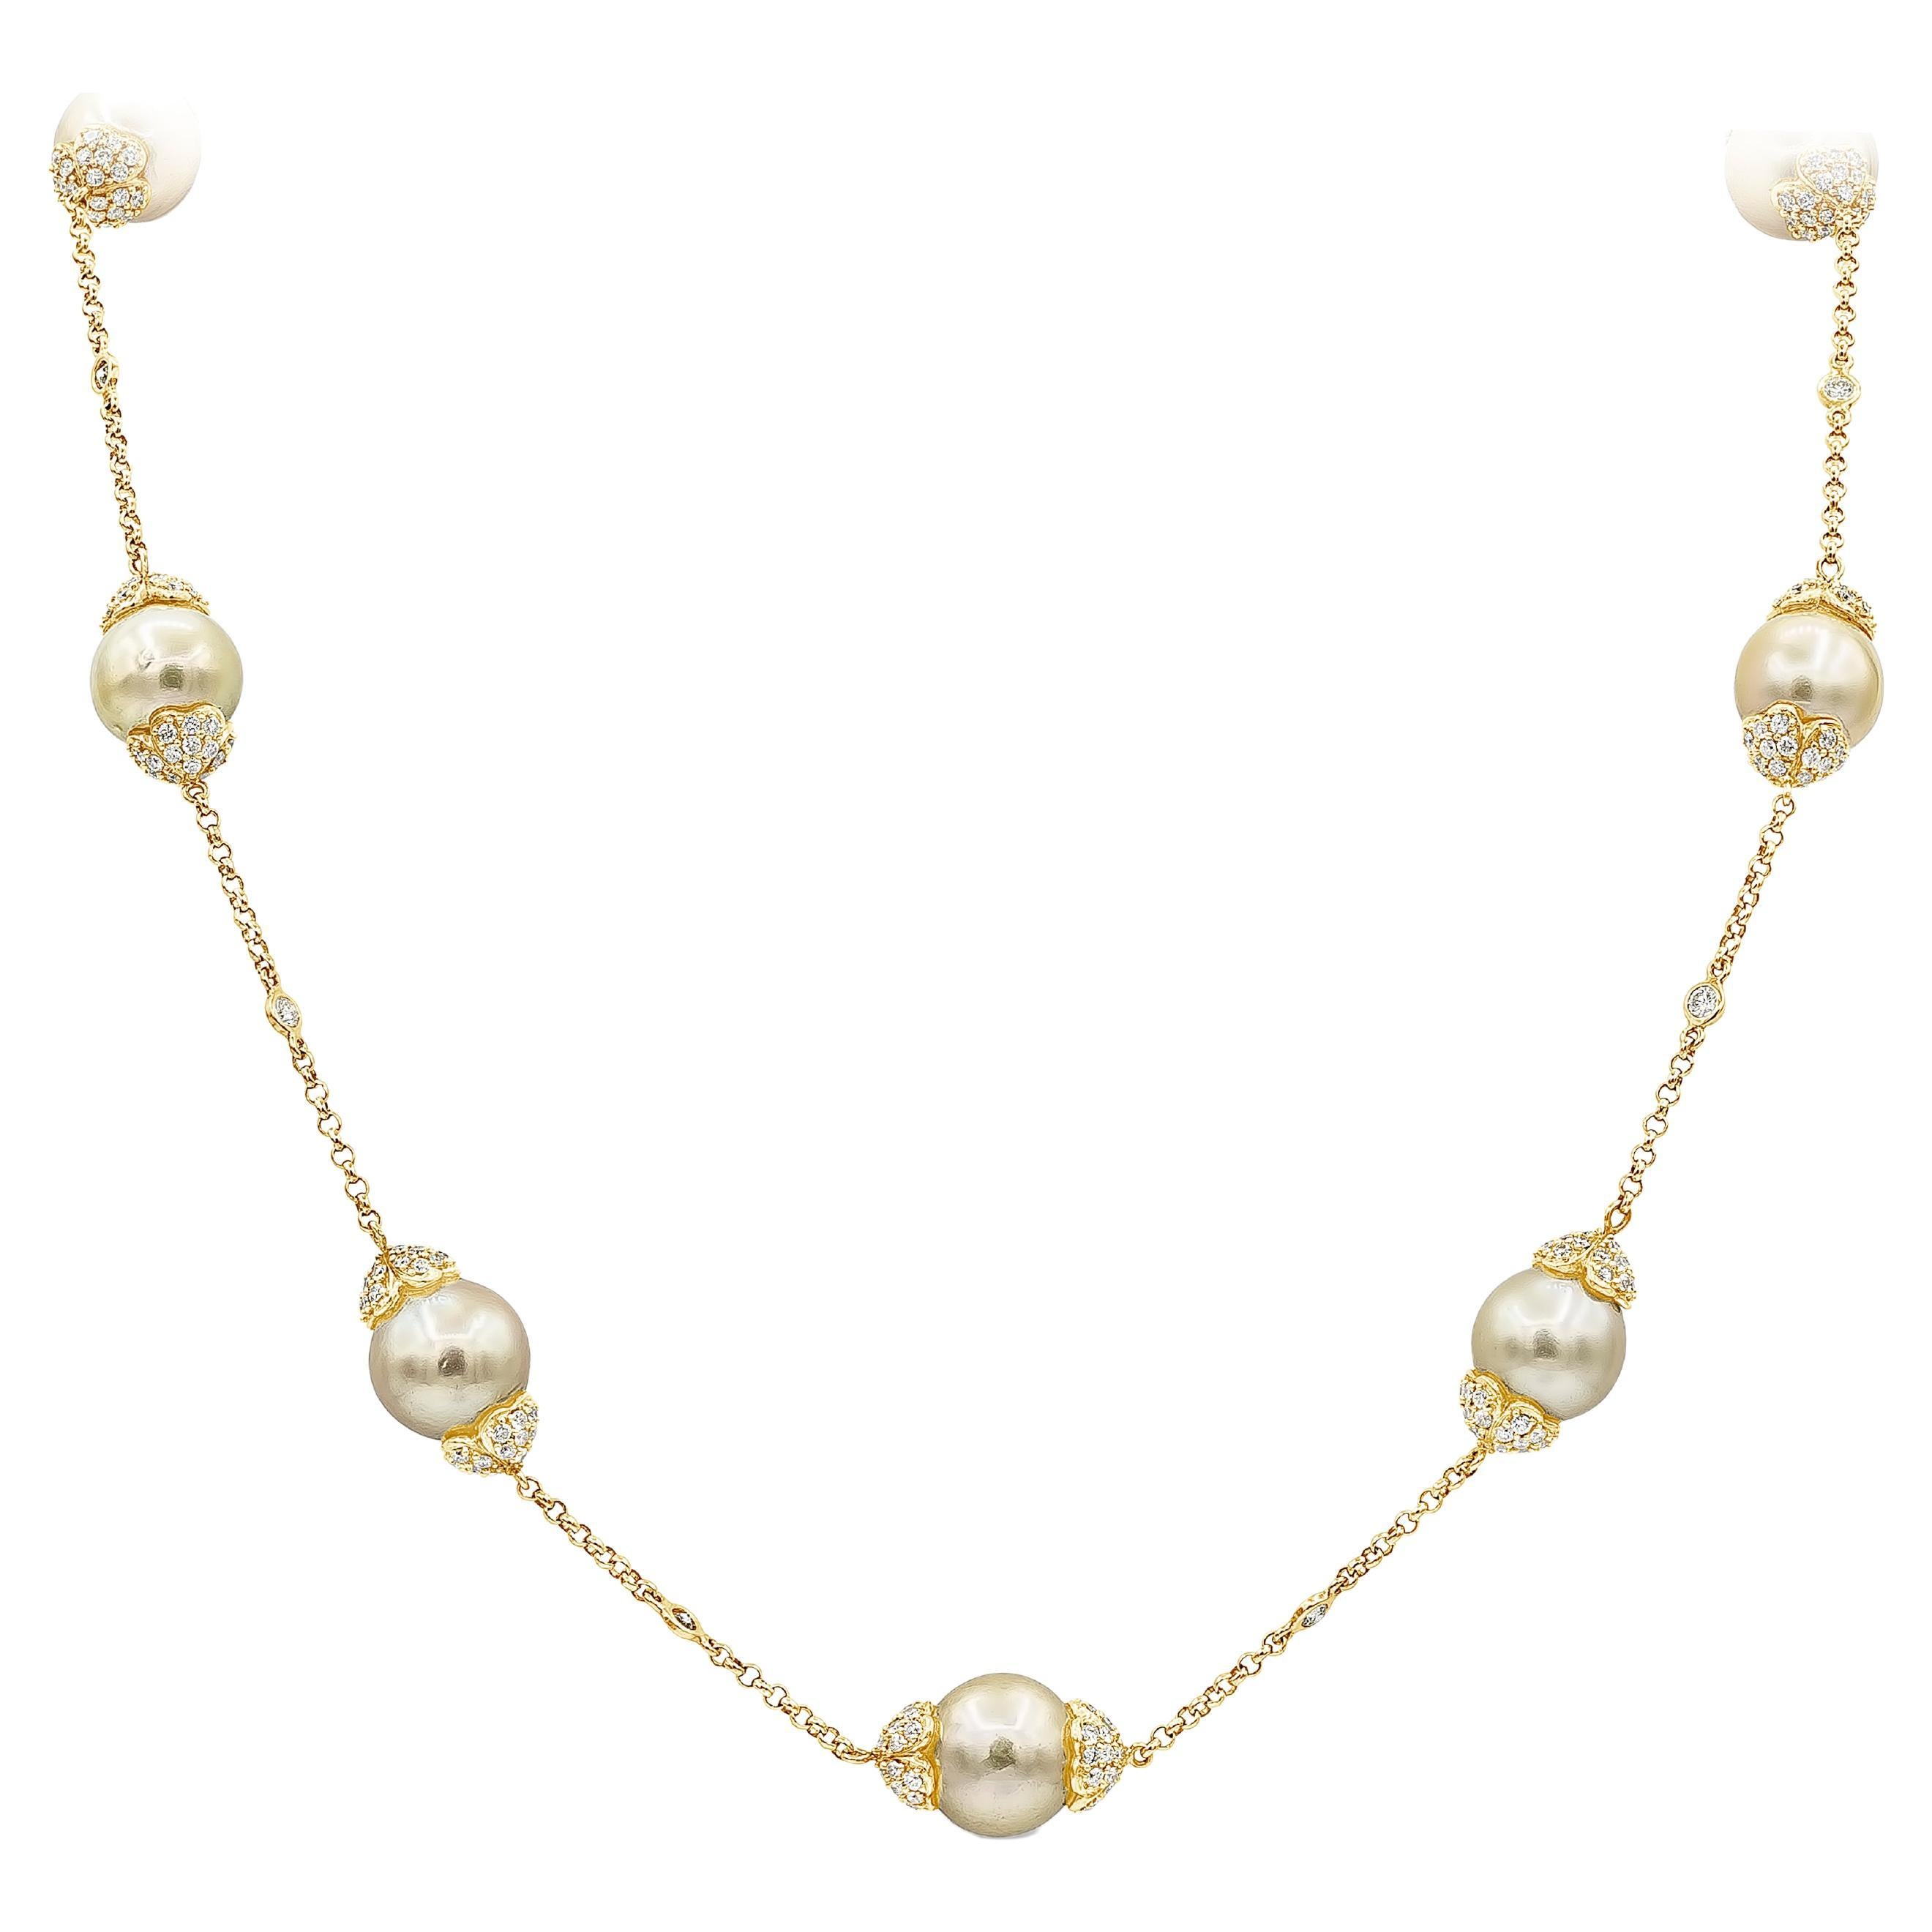 Roman Malakov 11.21 Carat Total Round Diamond and South Sea Pearl Necklace For Sale